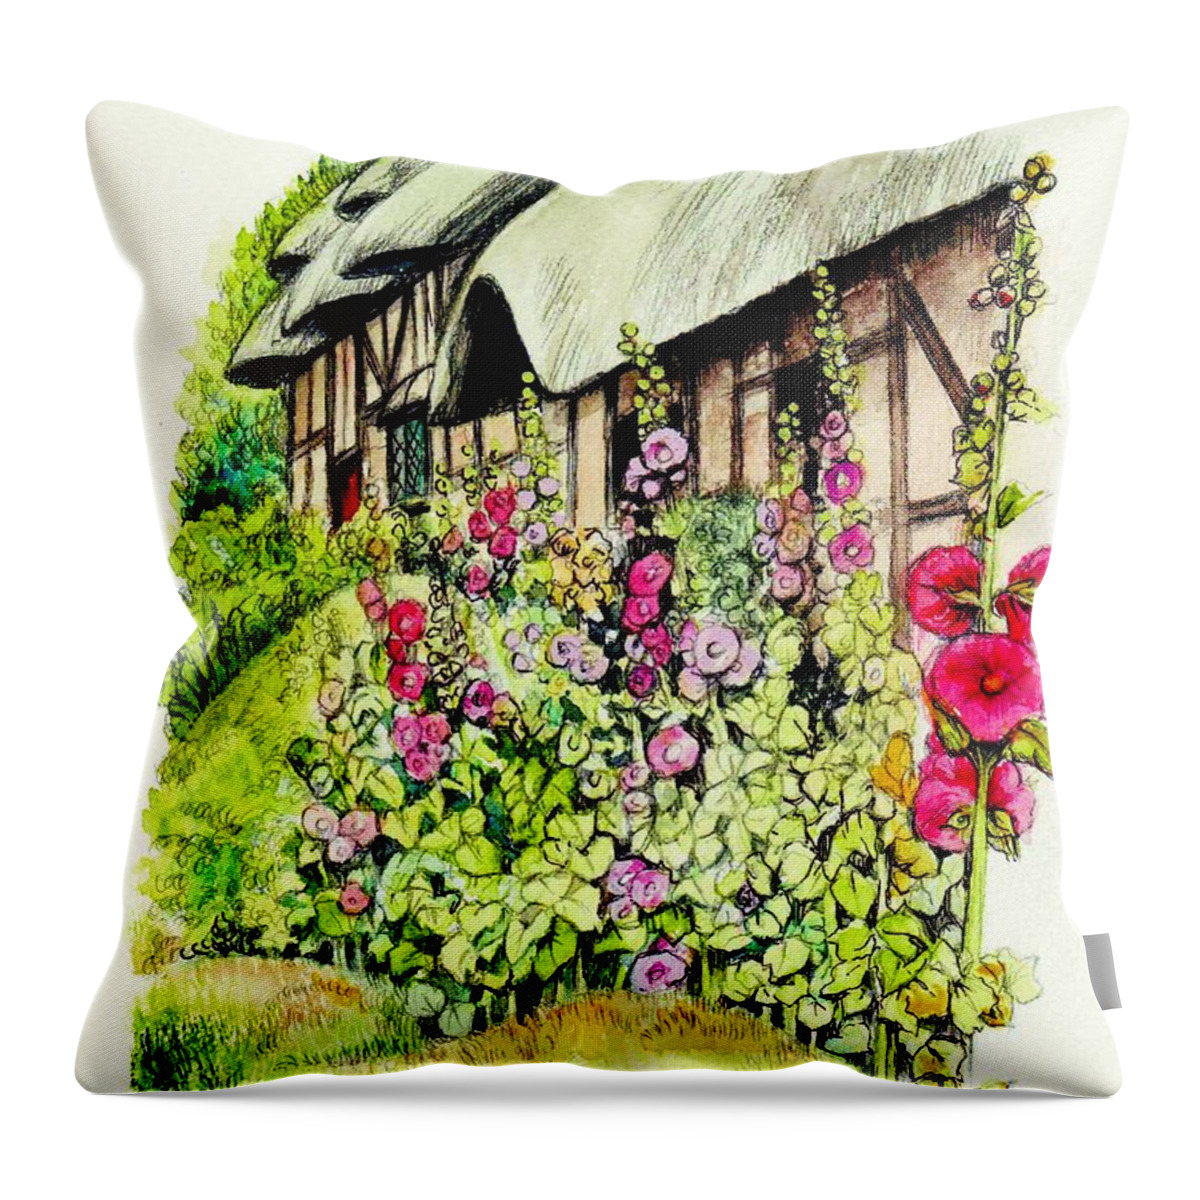 Anne Throw Pillow featuring the painting Anne Hathaway Cottage by Morgan Fitzsimons